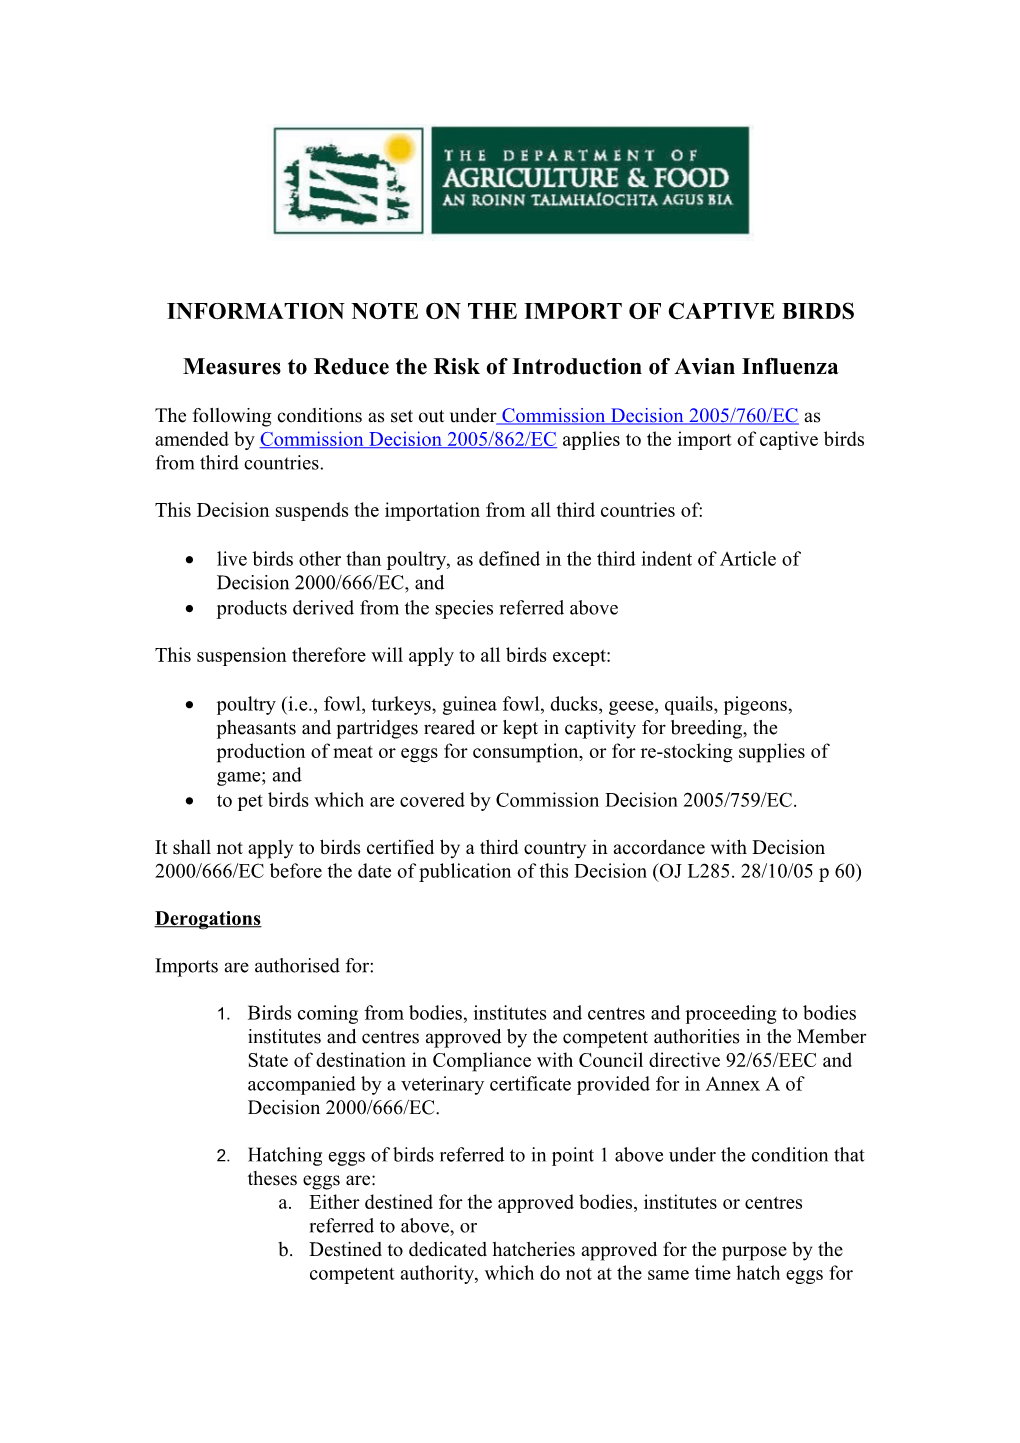 Information Note on the Import of Captive Birds